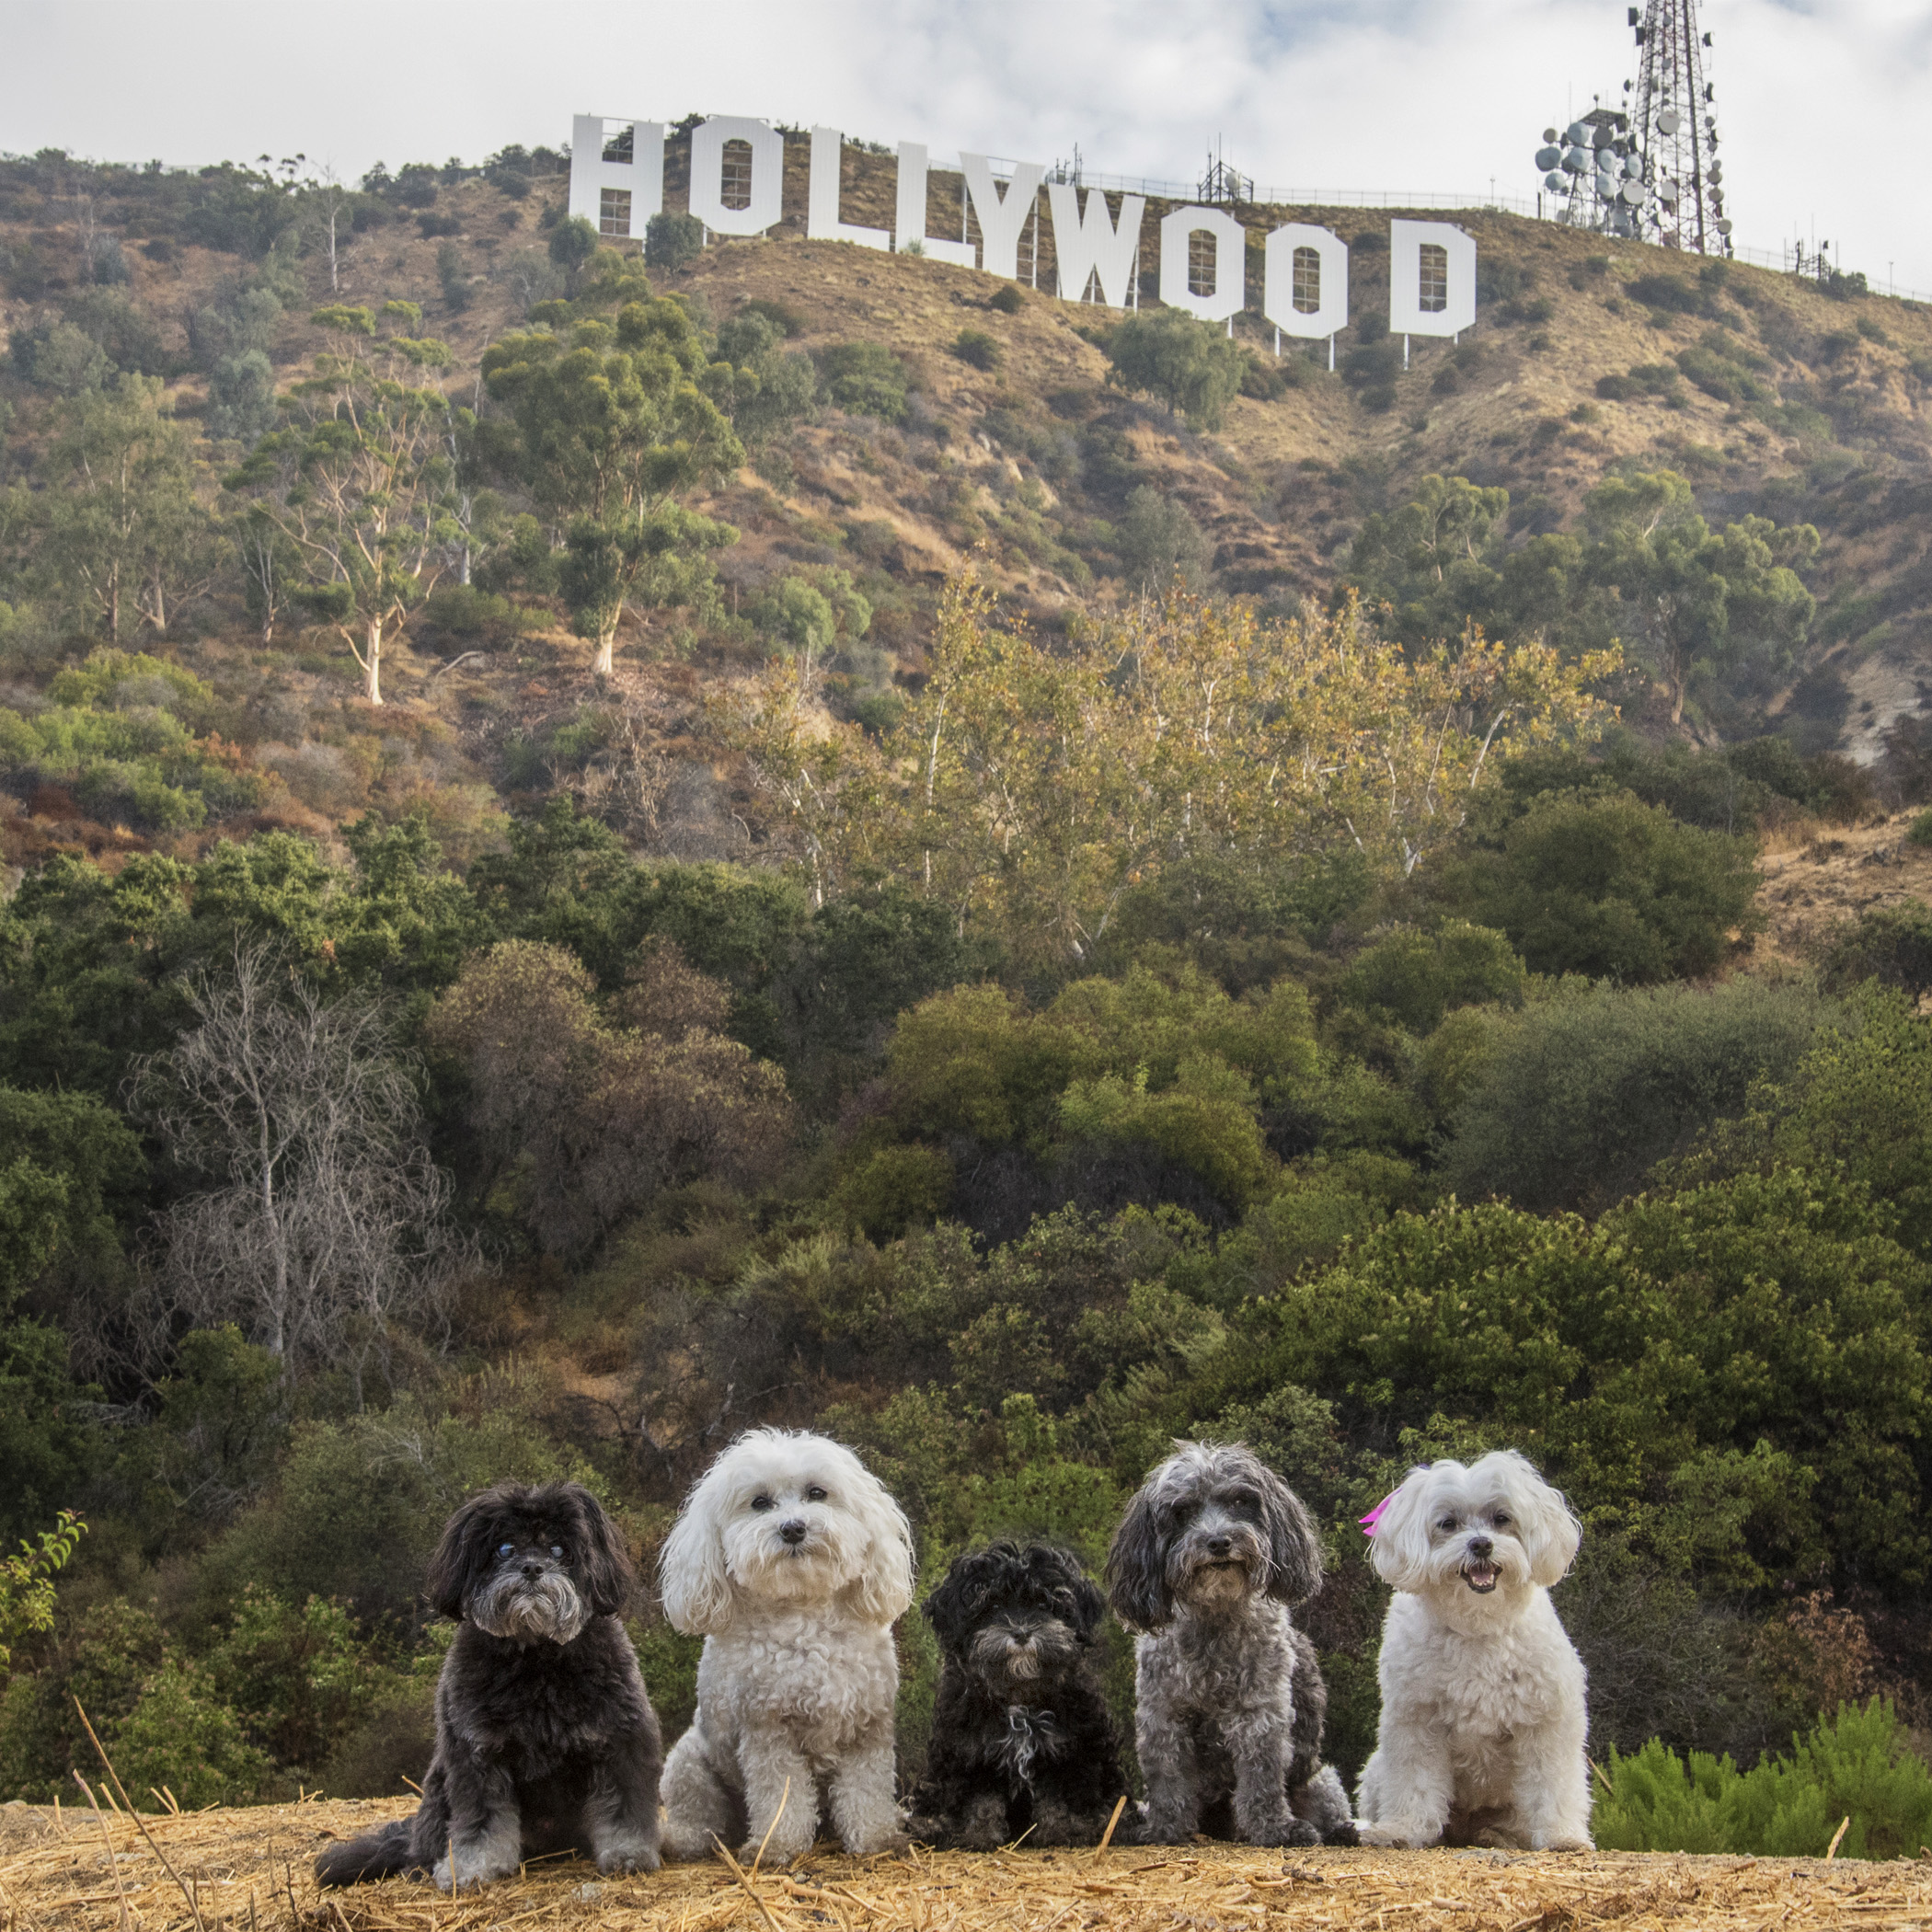  Hollywood, we have arrived!! If anyone knows of any walk-on extras needed, we’re ready and available! 